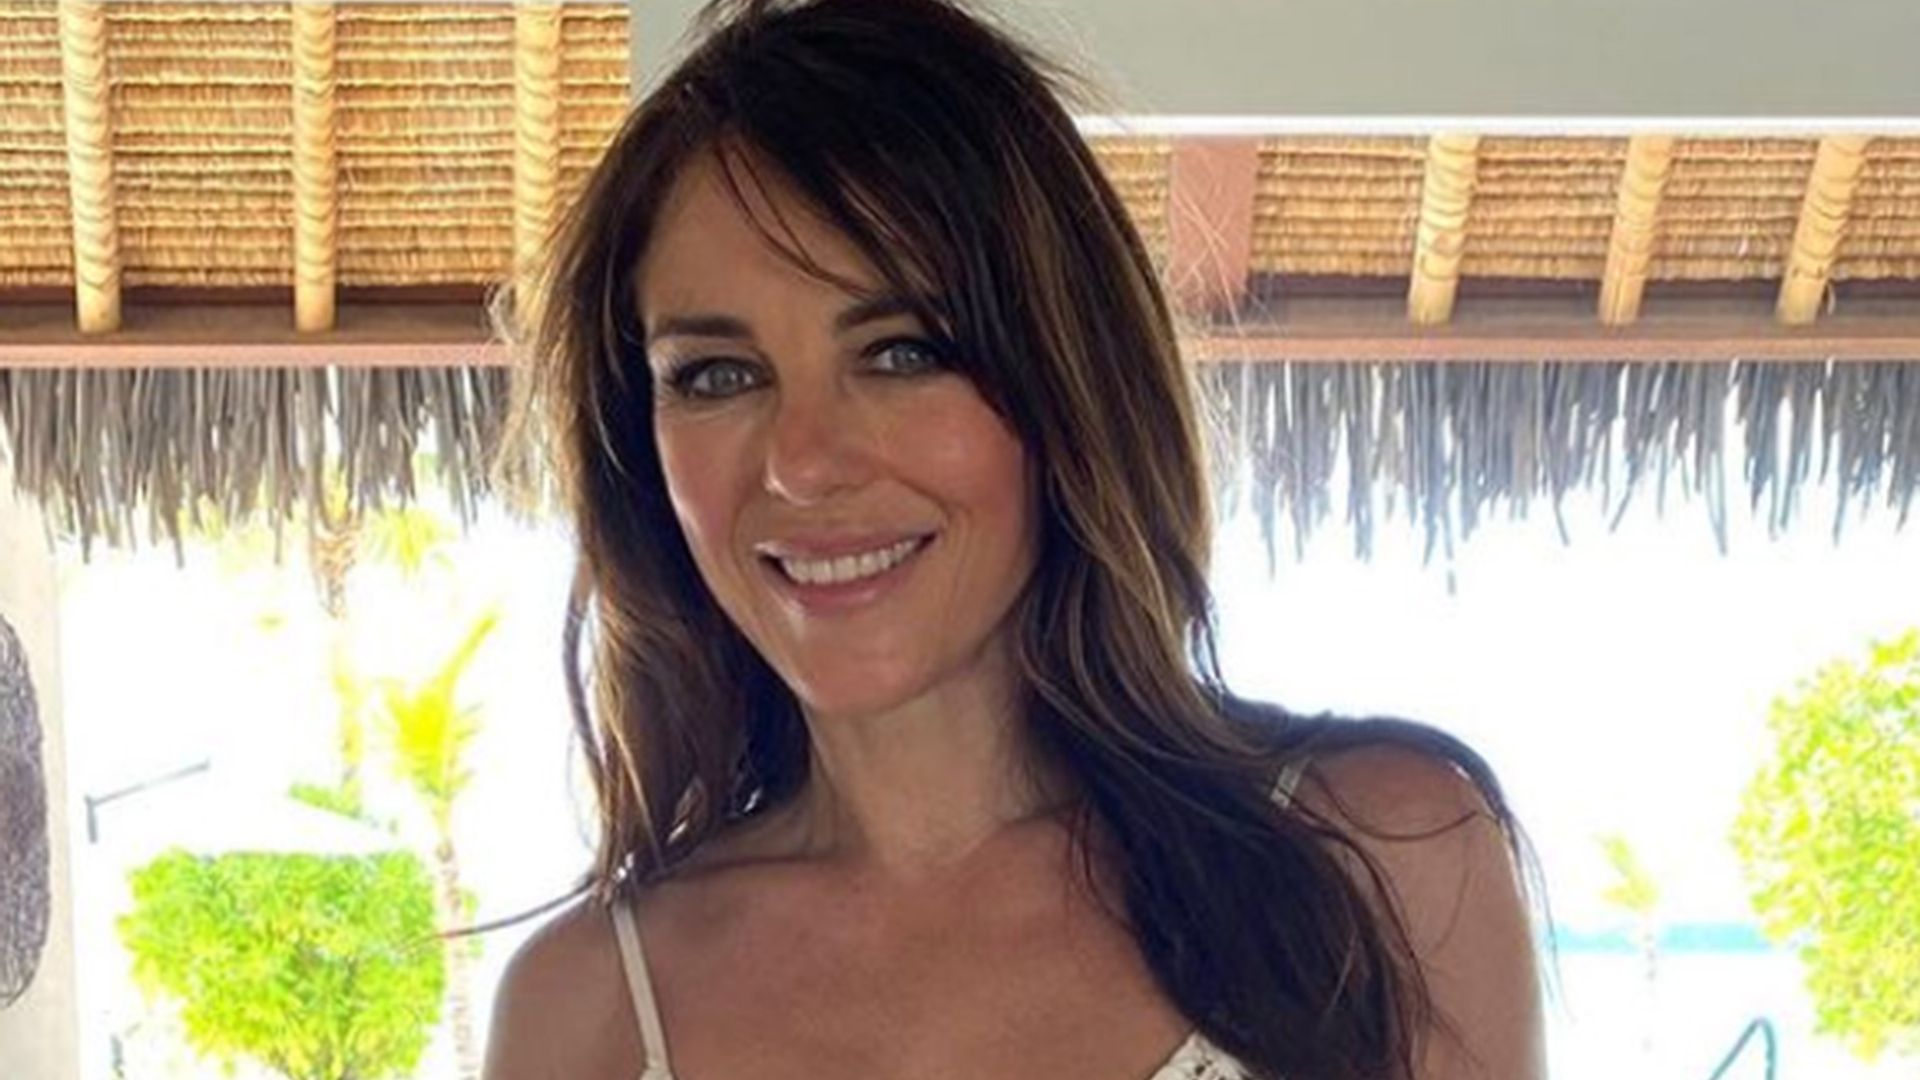 Liz Hurley flaunts cleavage as she poses with lookalike sister in